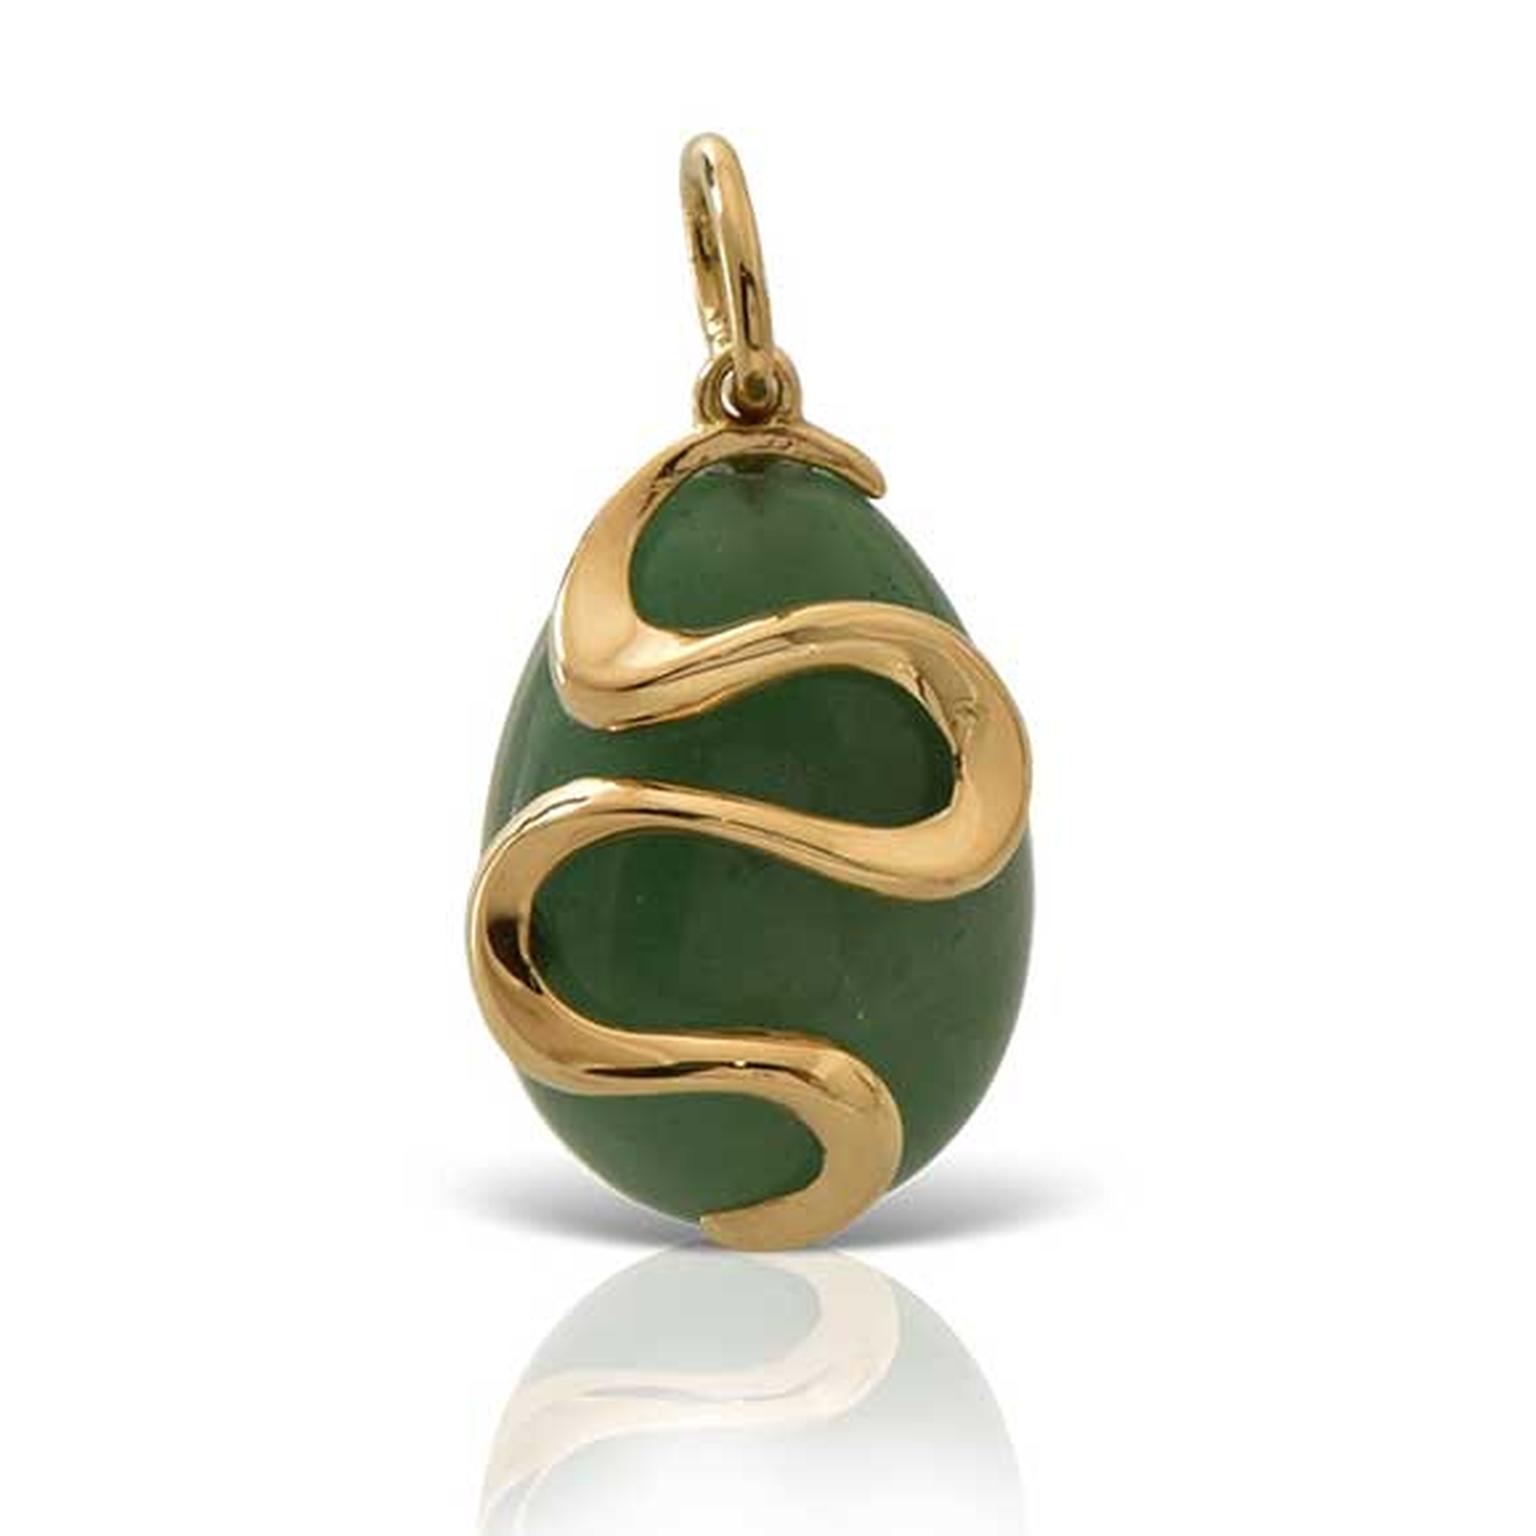 Lalaounis Easter egg pendant aventurine with swirl motif in gold